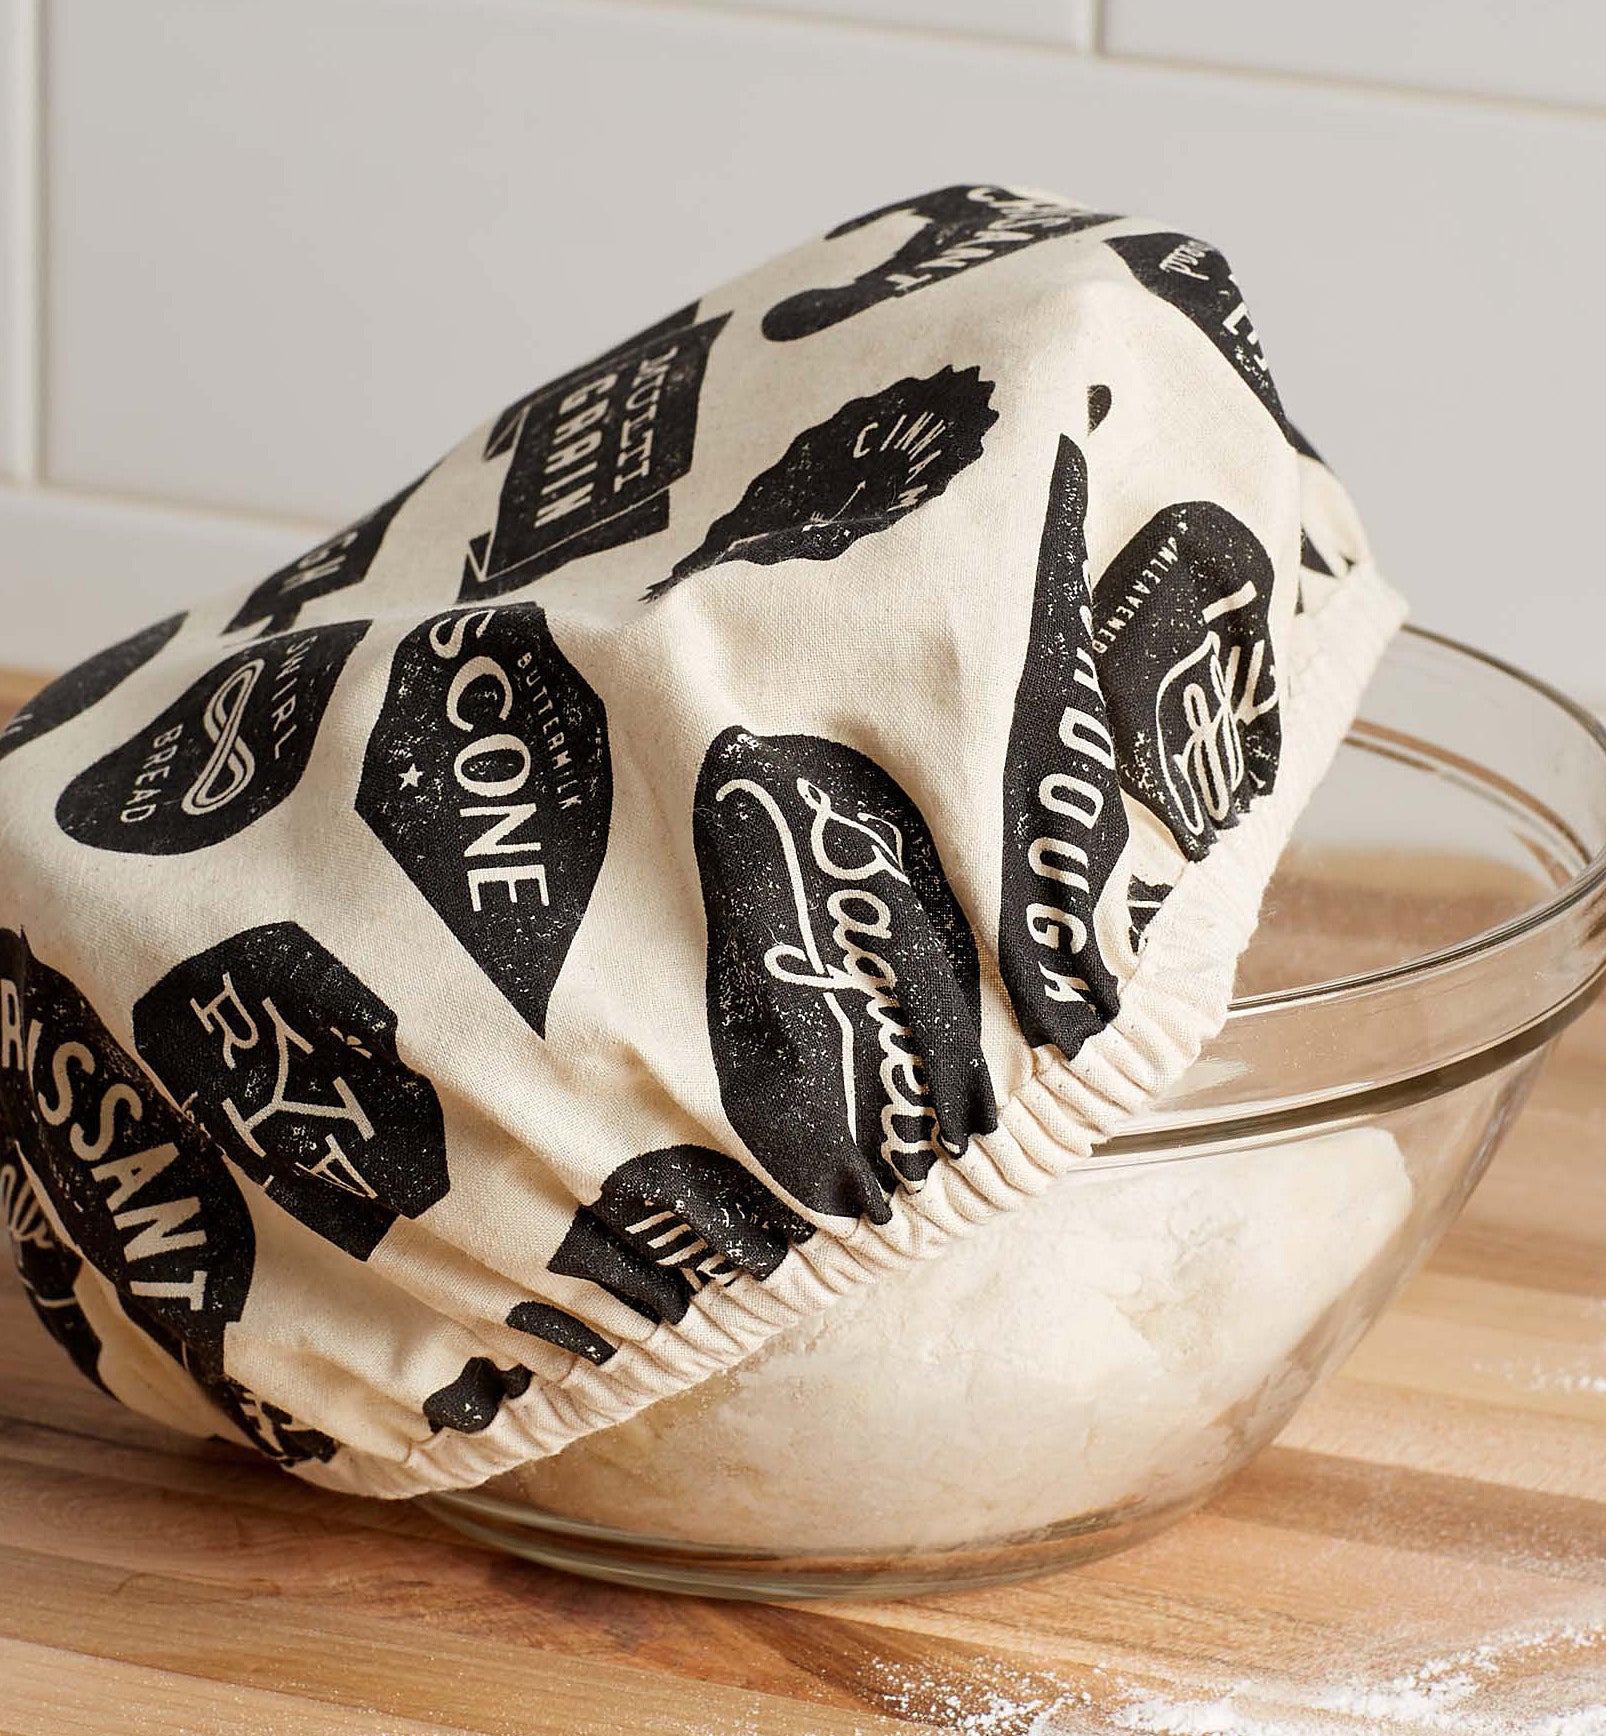 A fabric cover over a mixing bowl with dough inside